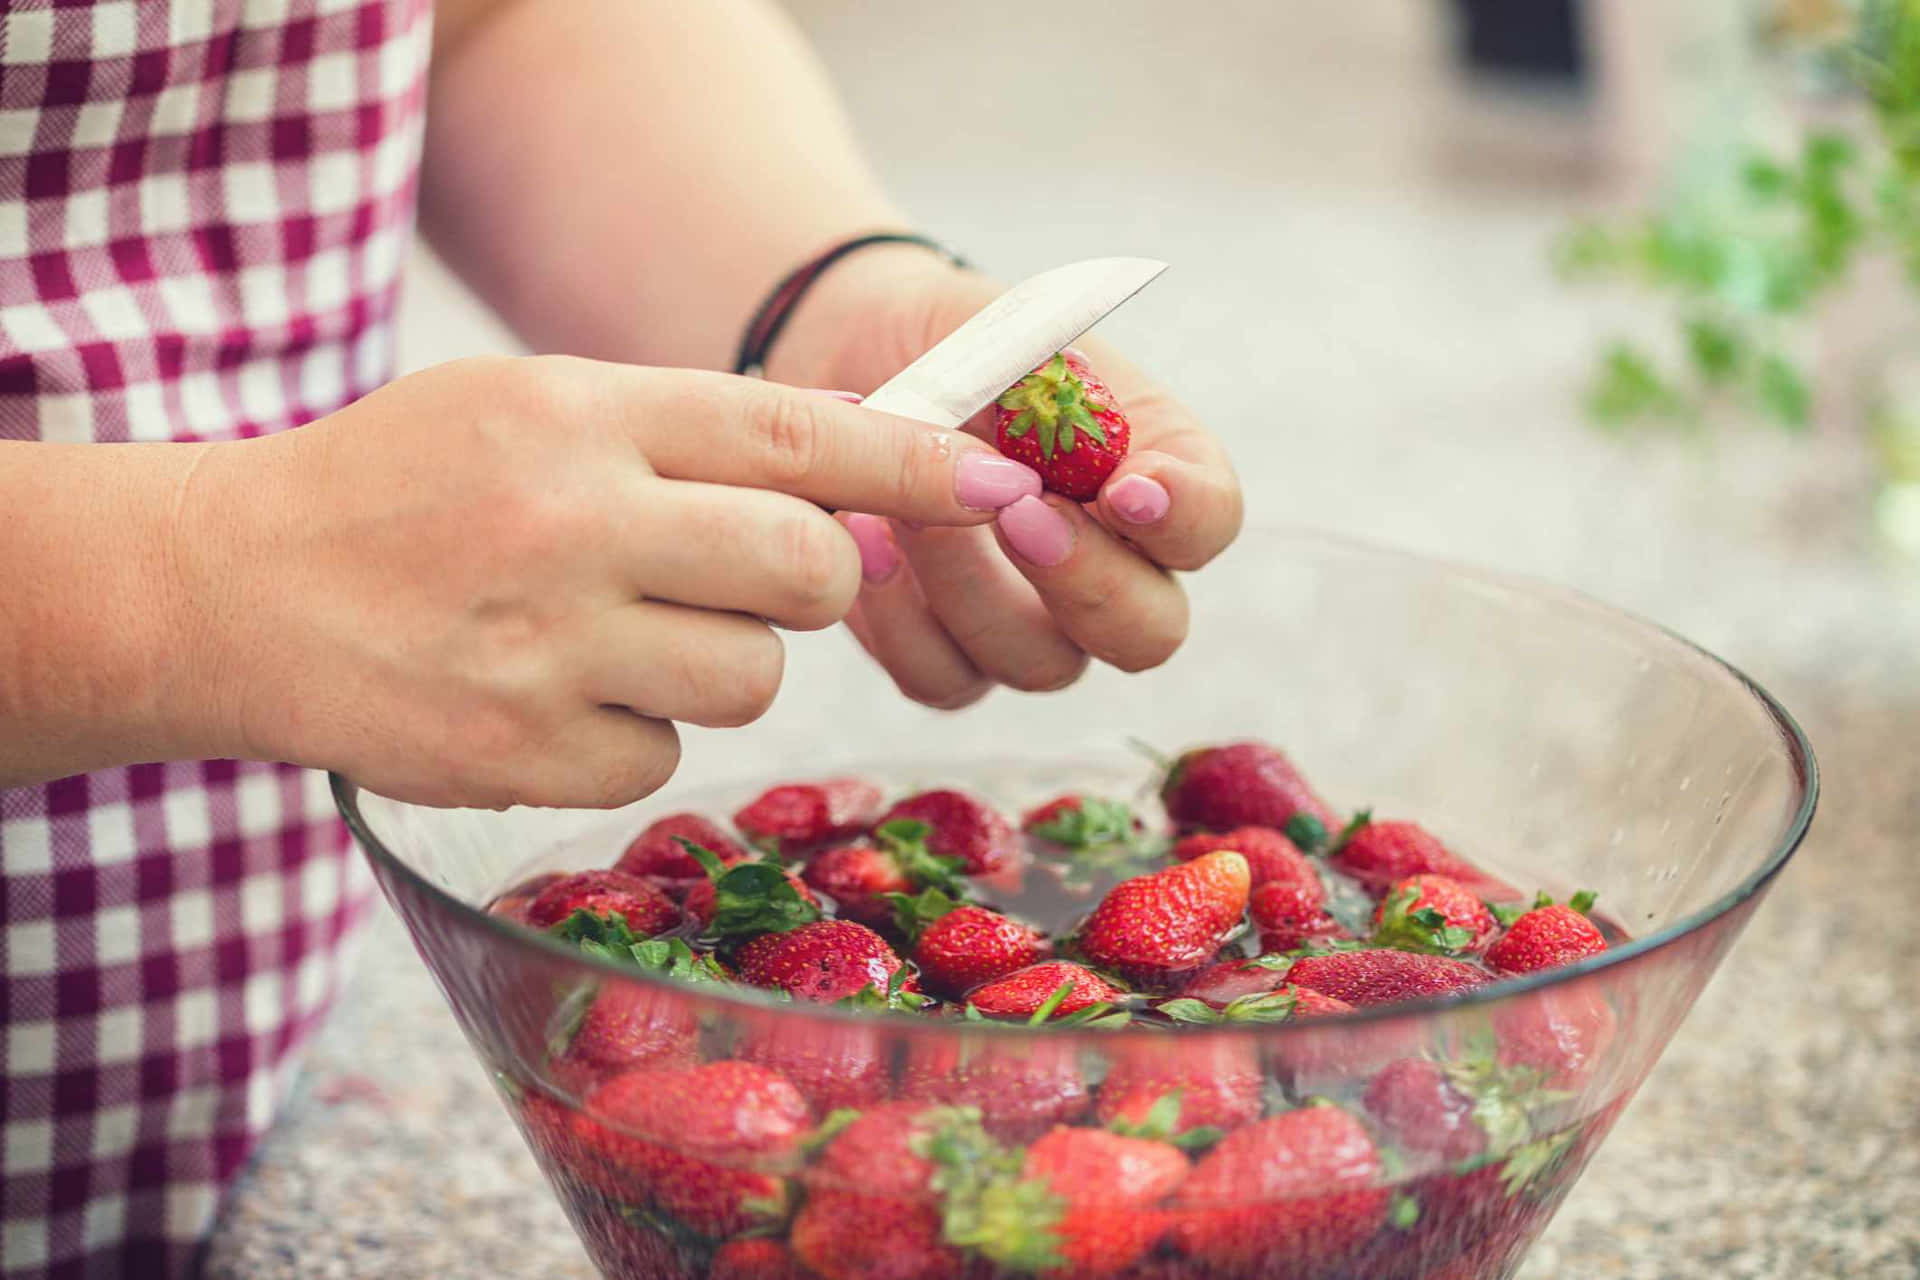 Enjoy sweet and juicy strawberries for a healthy snack!